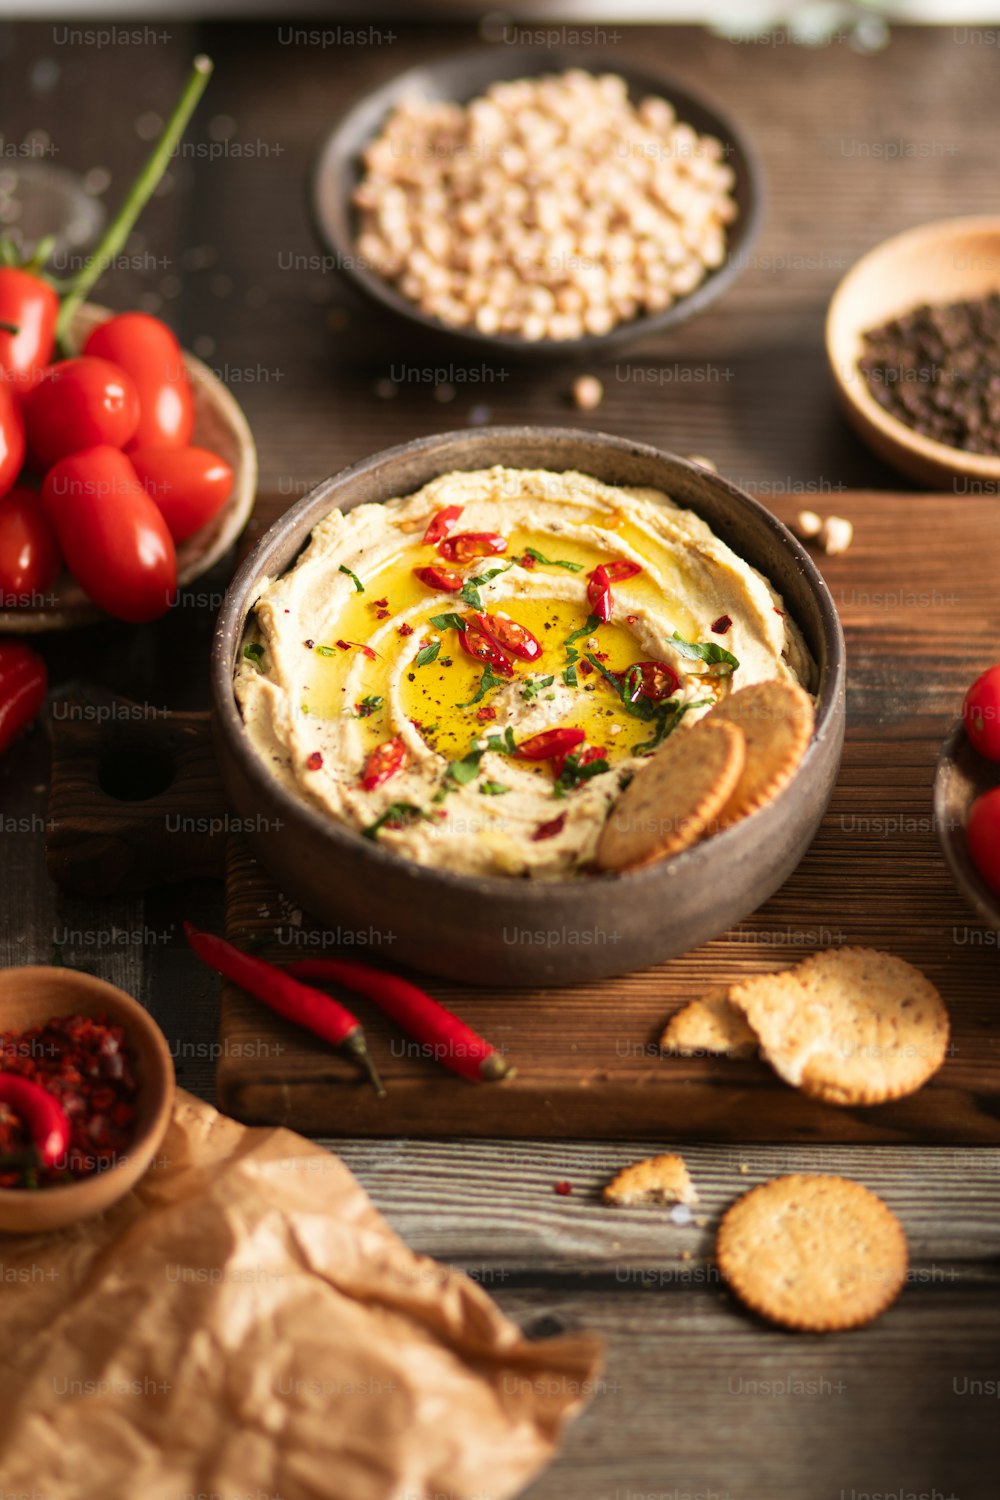 a bowl of hummus surrounded by crackers and tomatoes